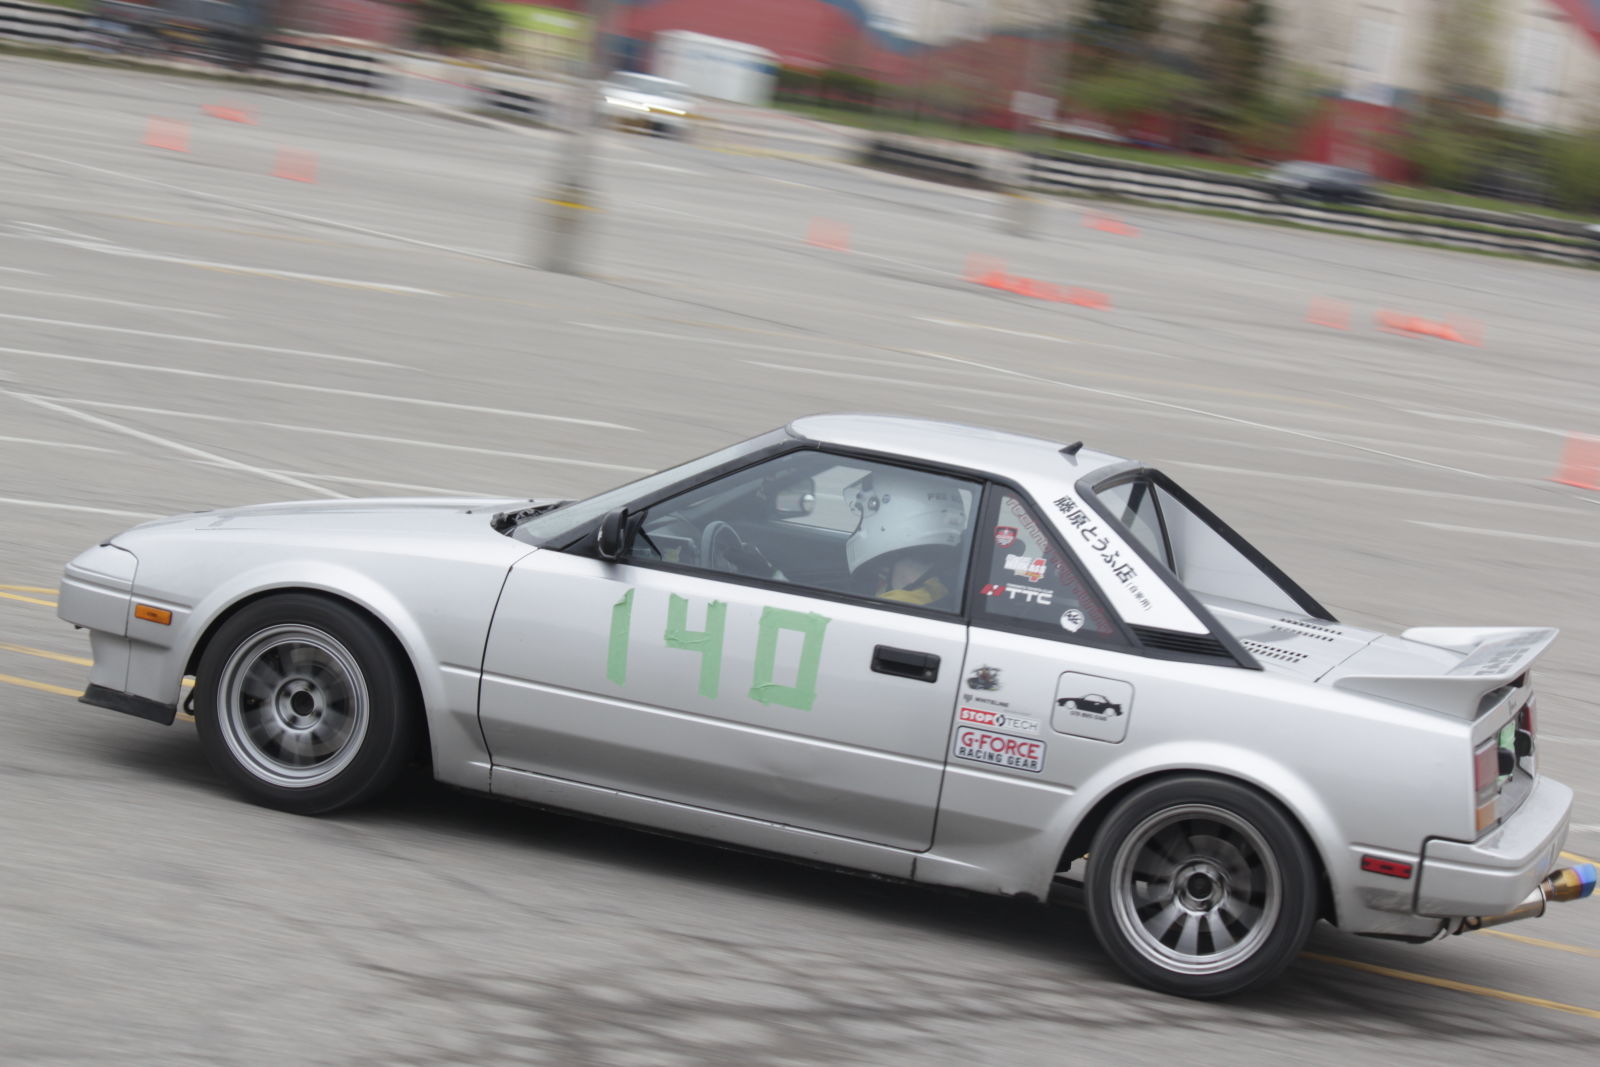 What happens when you put a 3SGTE in an AW11, you make it really fast.